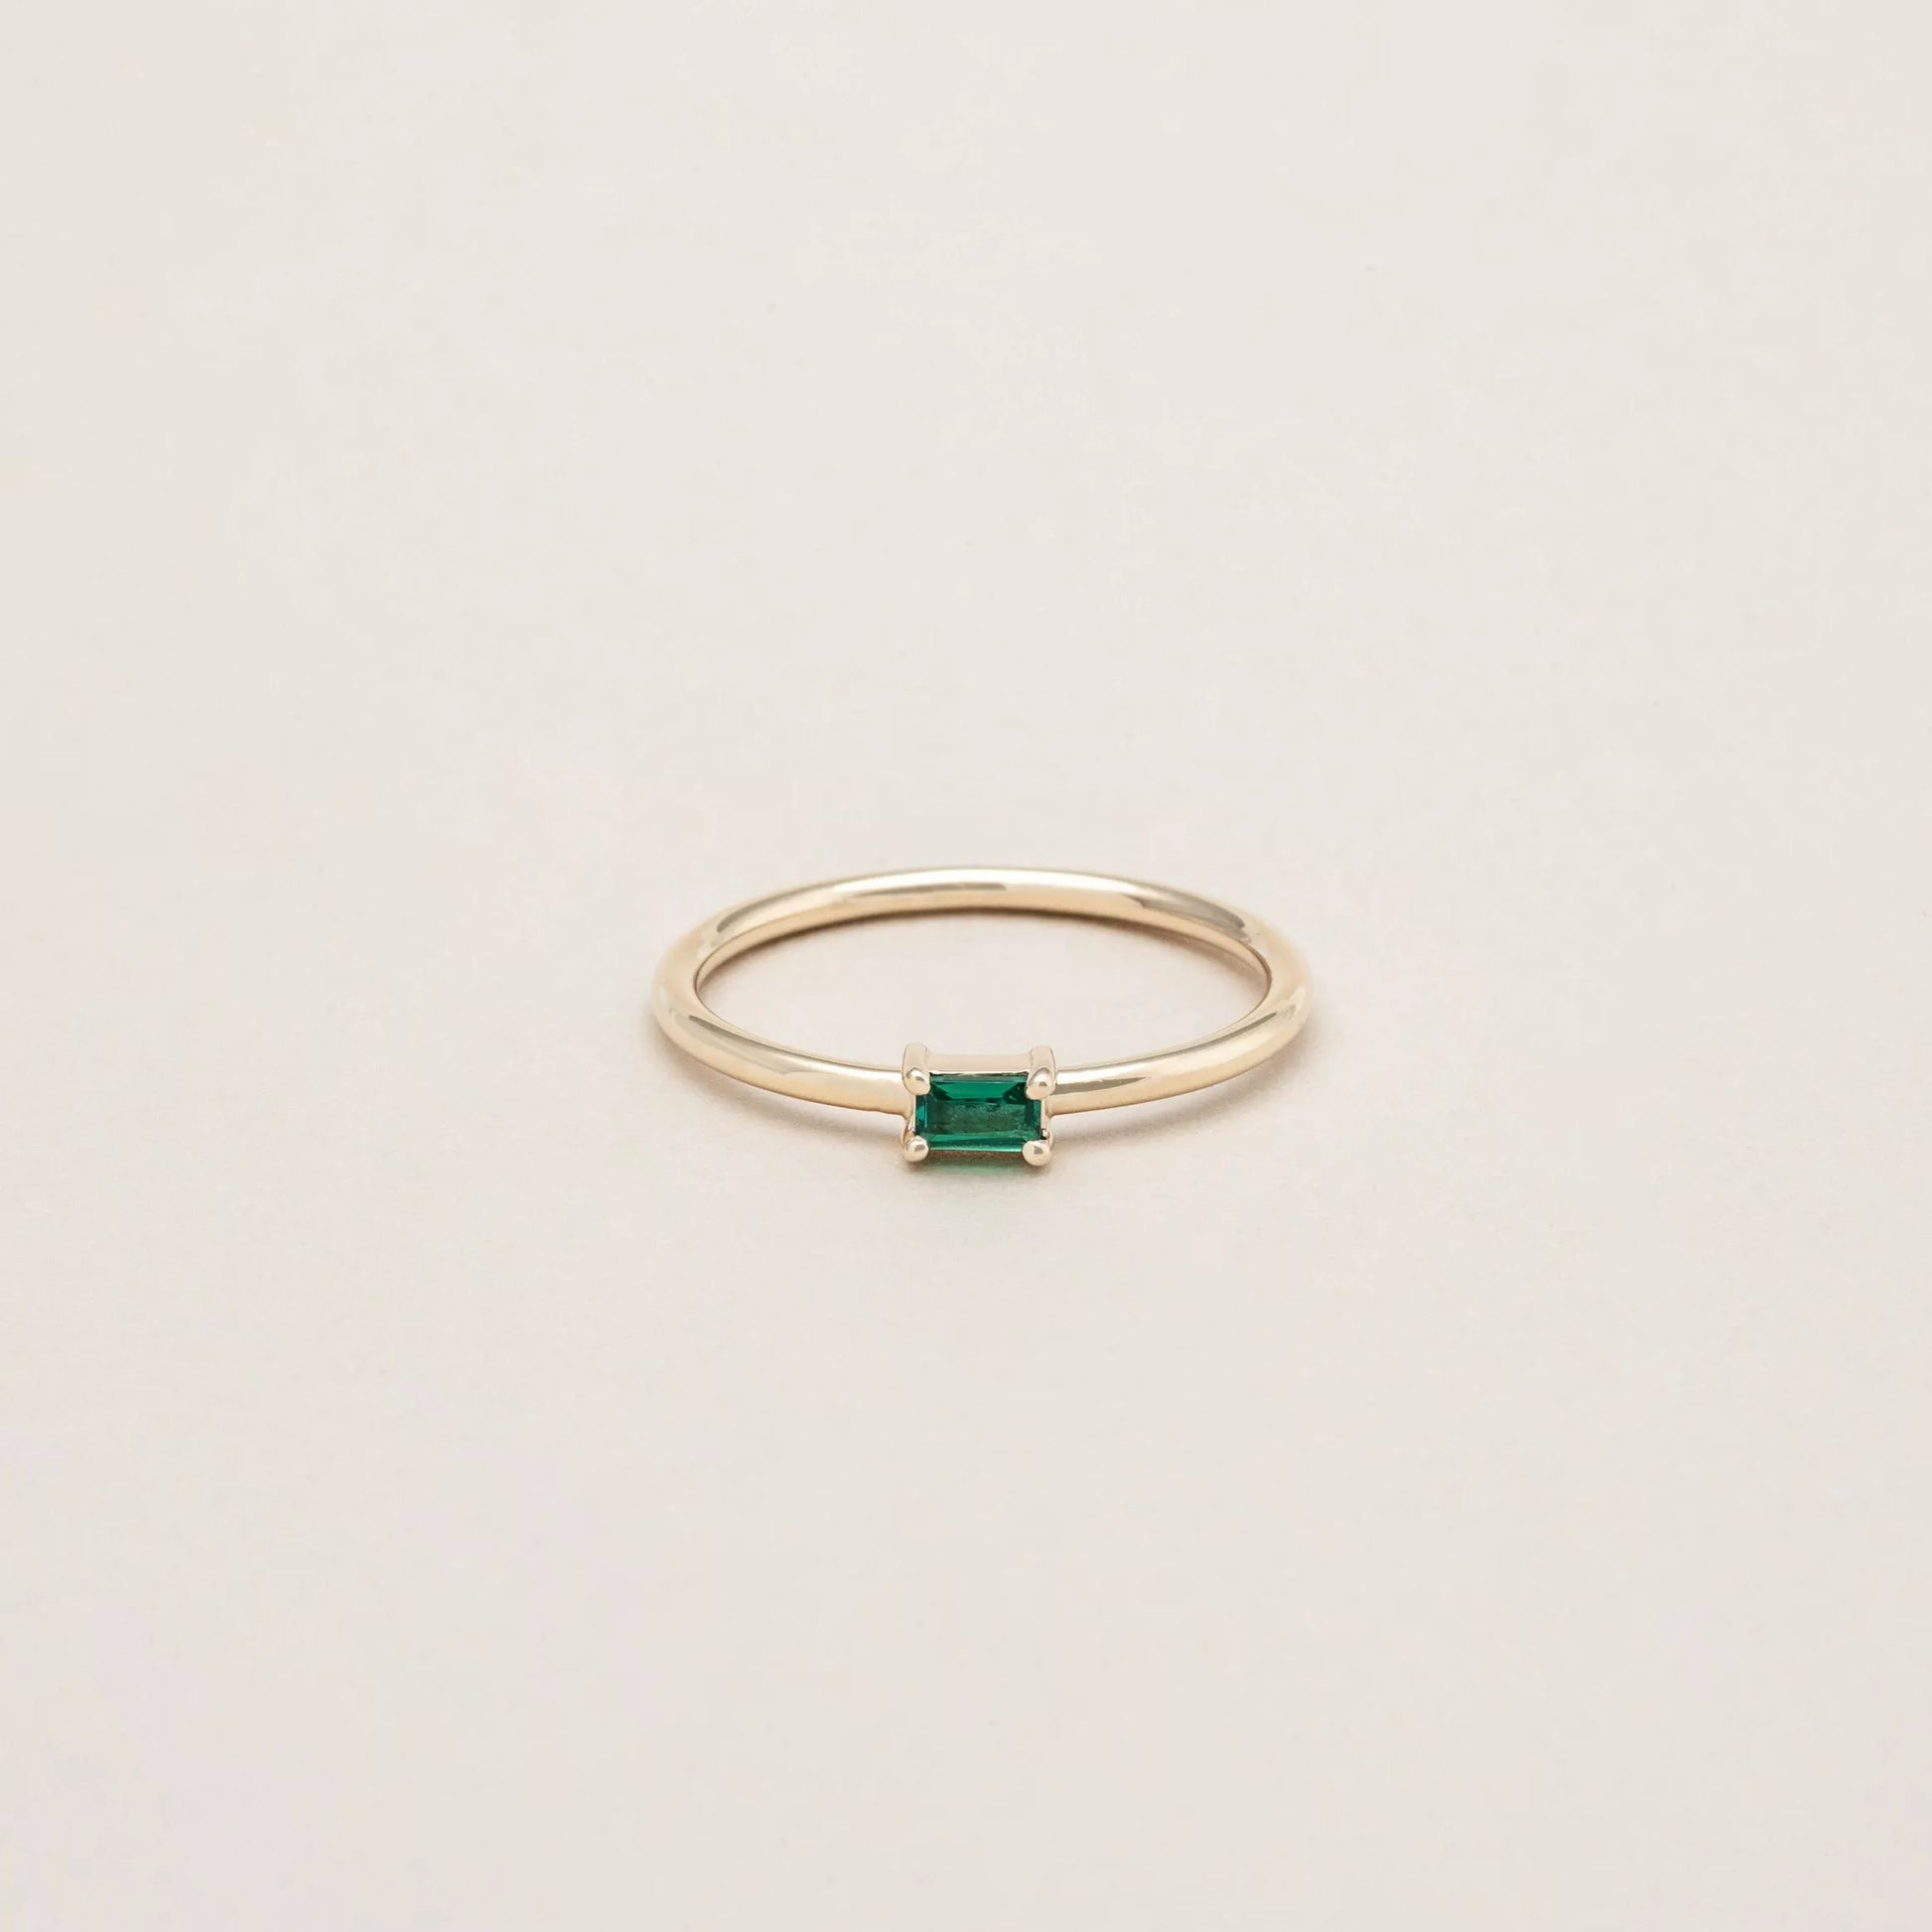 The Emerald Mini Baguette Ring. Recycled solid 14K gold.